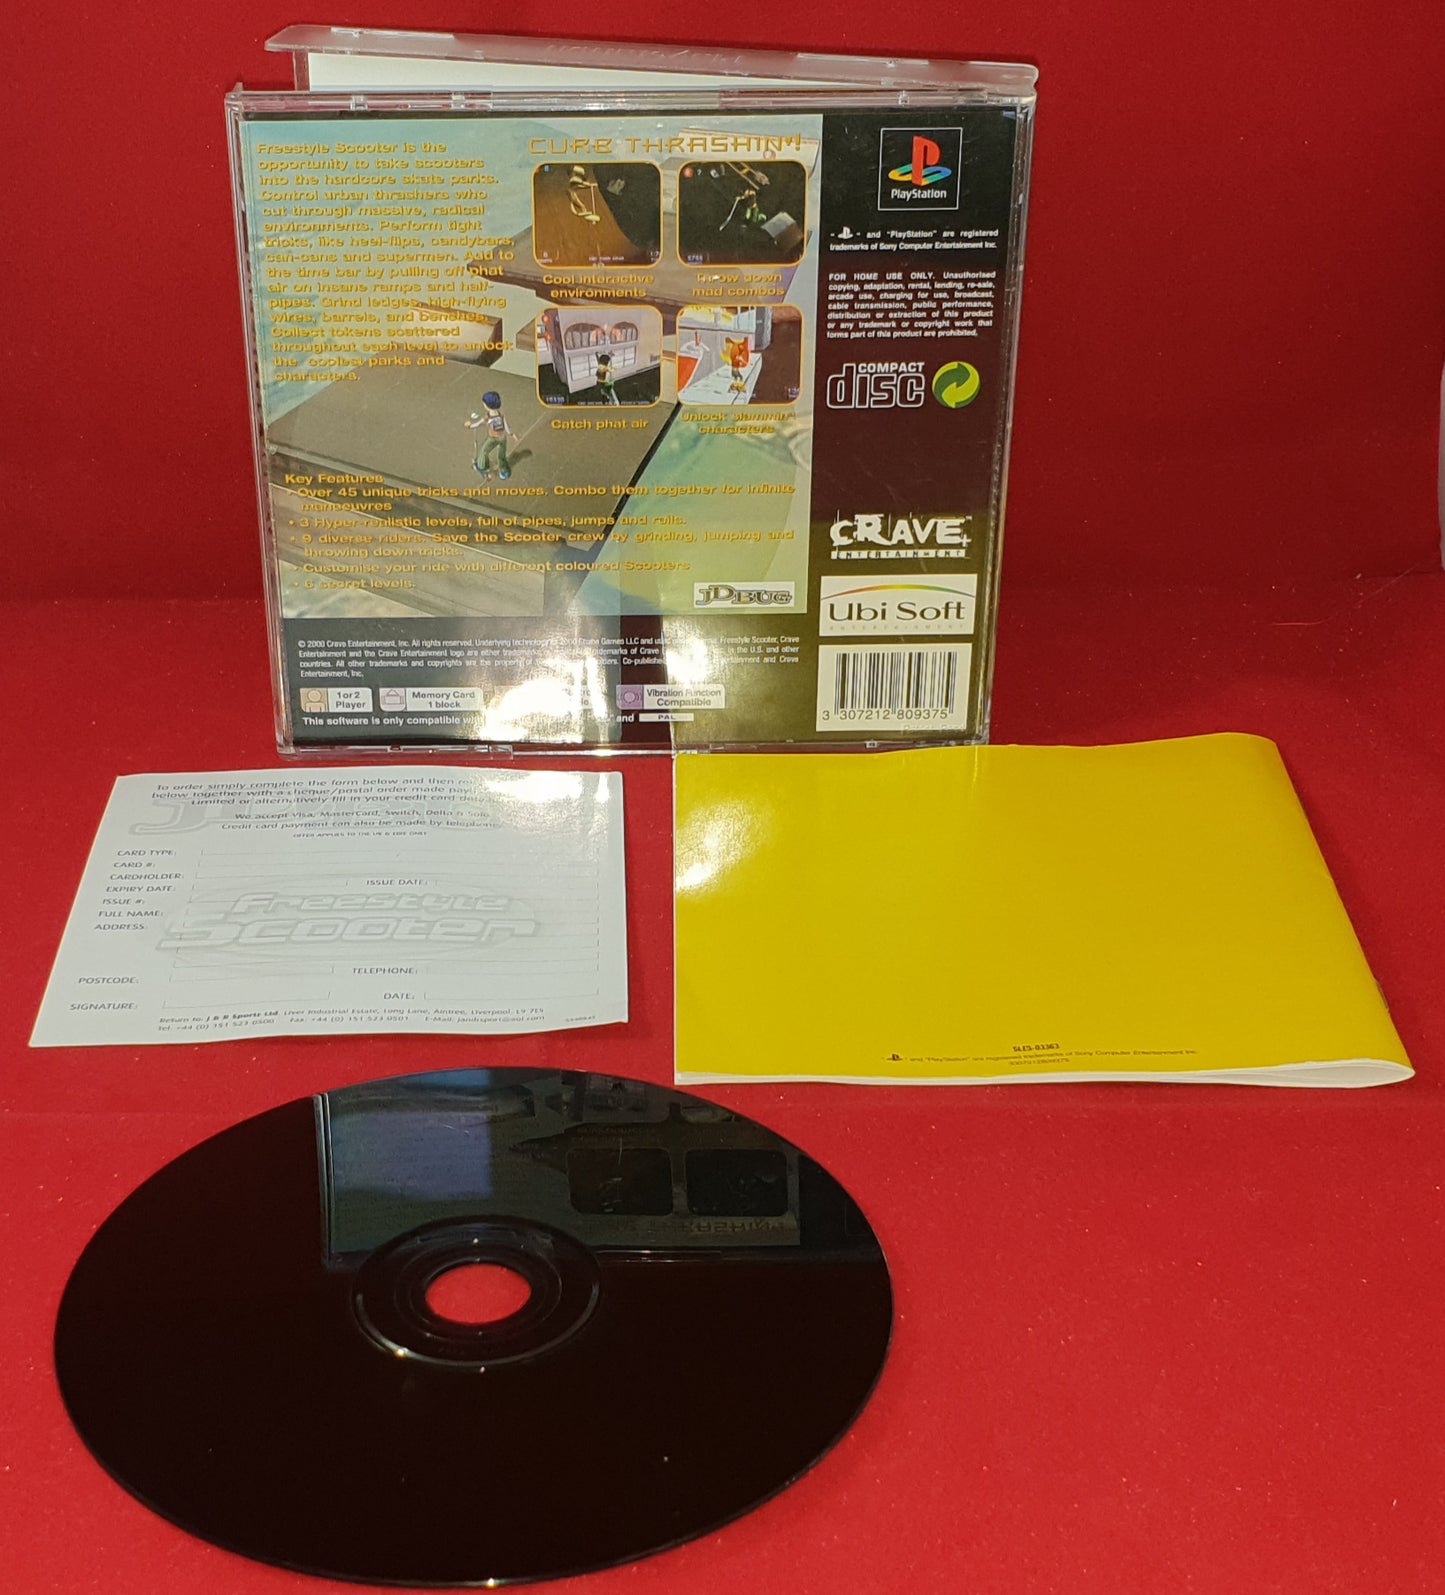 Freestyle Scooter Sony Playstation 1 (PS1) Game